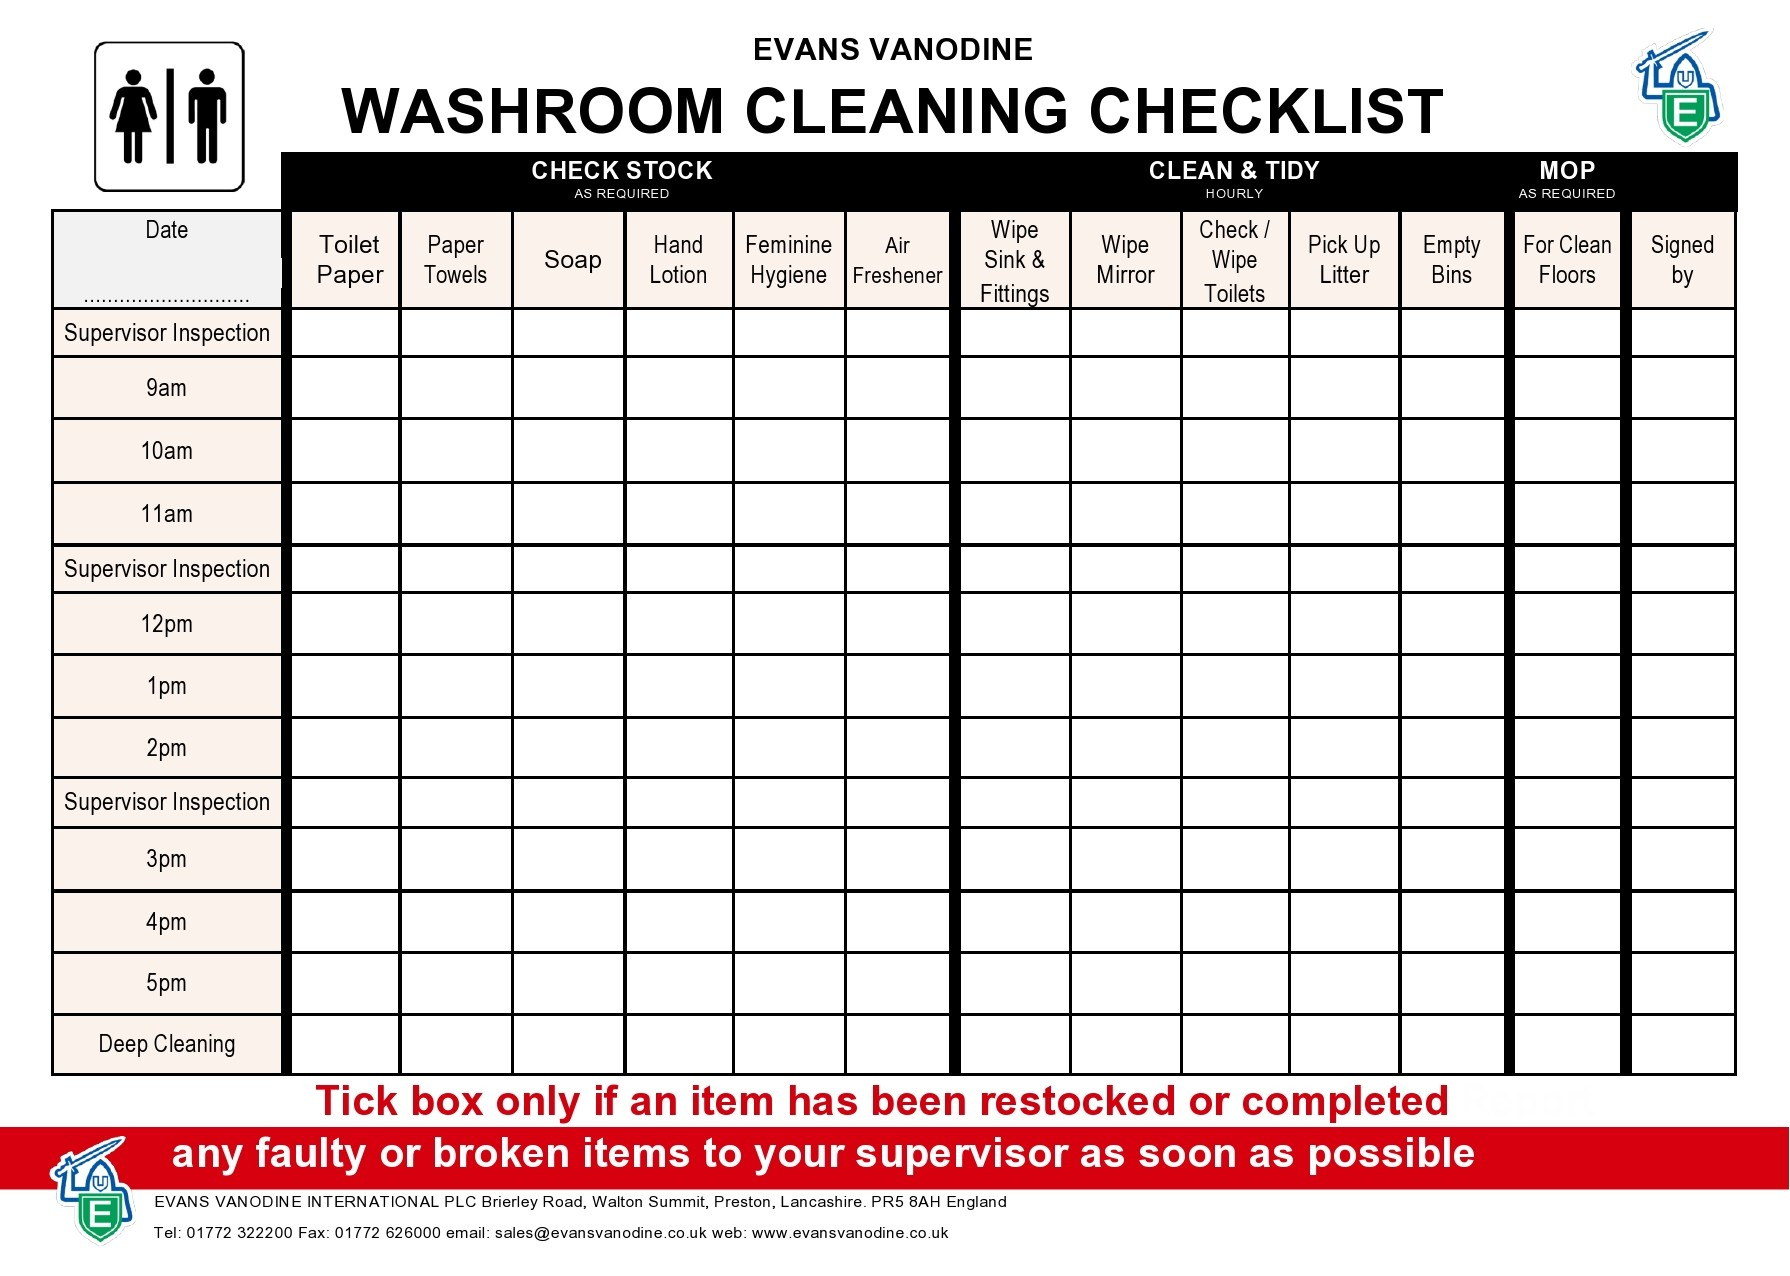 11 Printable Bathroom Cleaning Checklists [Word] ᐅ TemplateLab Regarding Bathroom Cleaning Checklist Template Inside Bathroom Cleaning Checklist Template